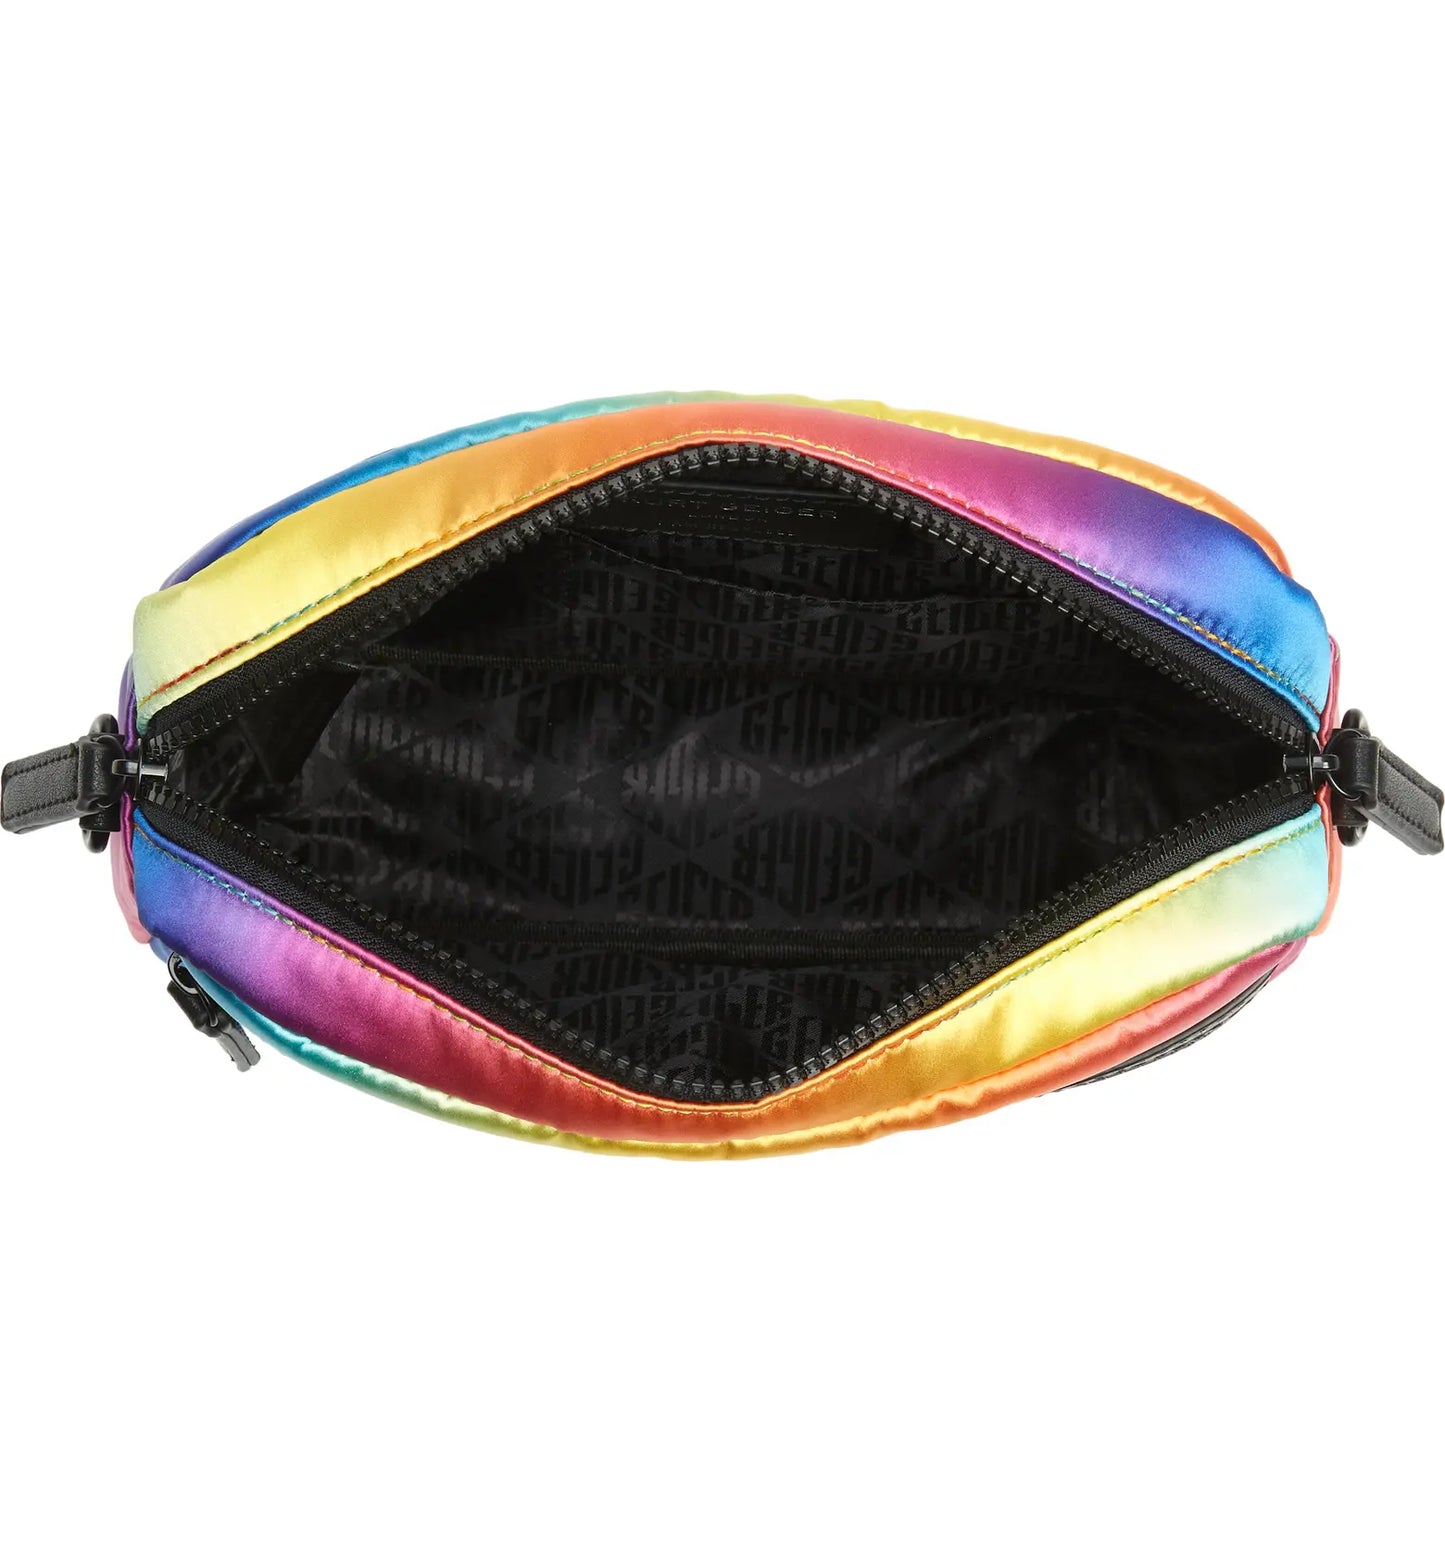 Rainbow Leather Crossbody Bag For Women Classic Designer Kurt Geiger Tote  With Chain Strap, Ideal For Evening & Beach Use From Telfar007, $33.36 |  DHgate.Com